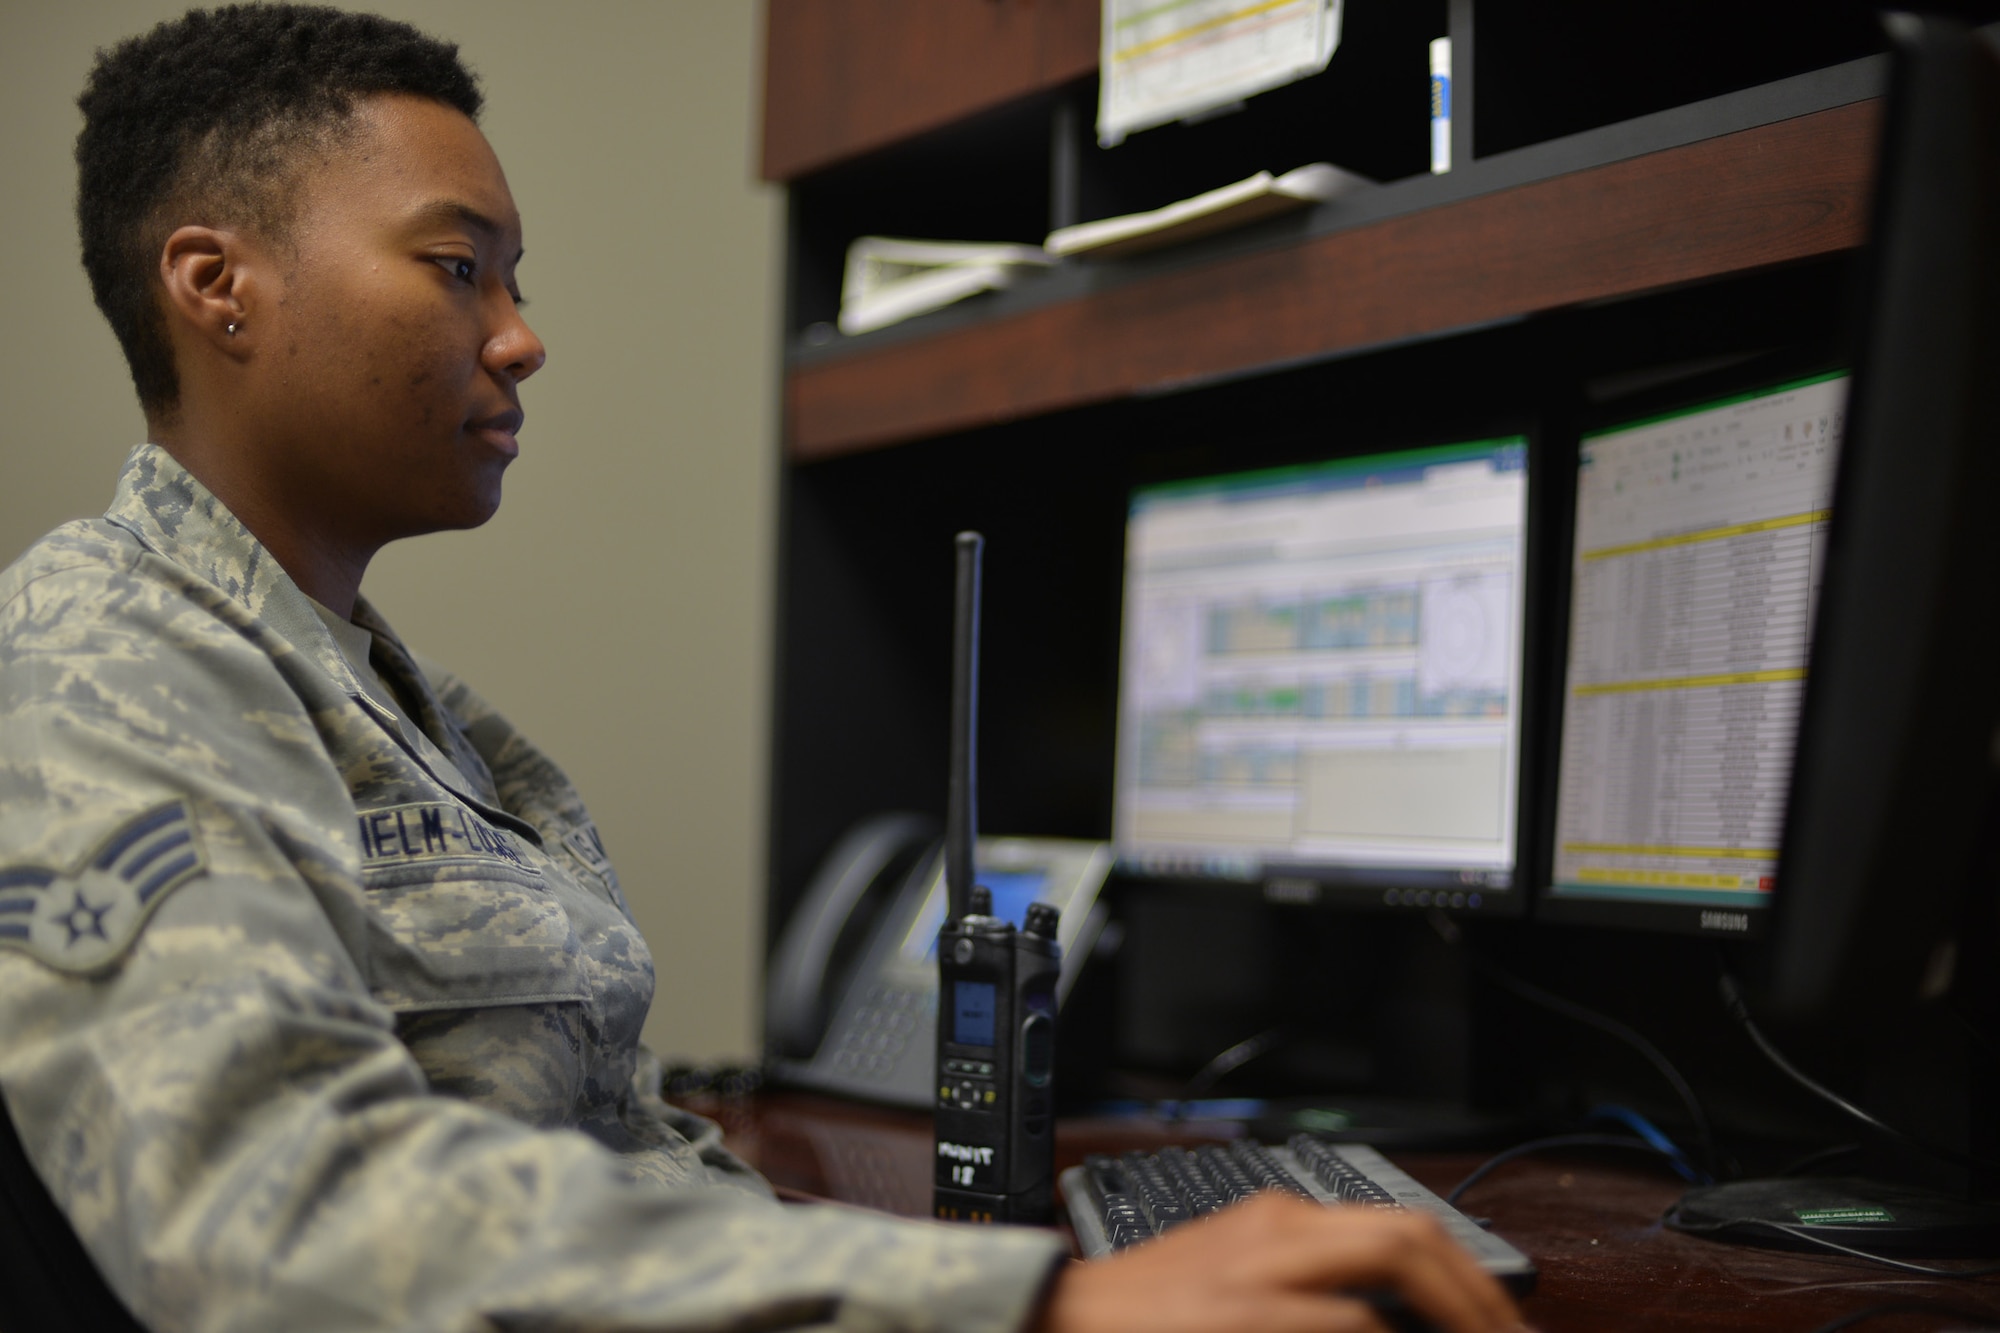 Senior Airman Jasmine Helm-Lucas, 341st Munitions Squadron munitions controller, logs information on spreadsheets June 19, 2017, at Malmstrom Air Force Base, Mont. Tight security is in place due to the nature of the nuclear deterrence mission at Malmstrom and every movement and piece of maintenance conducted on reentry systems and vehicles is logged on a spreadsheet for accountability. (U.S. Air Force photo/Airman 1st Class Daniel Brosam)